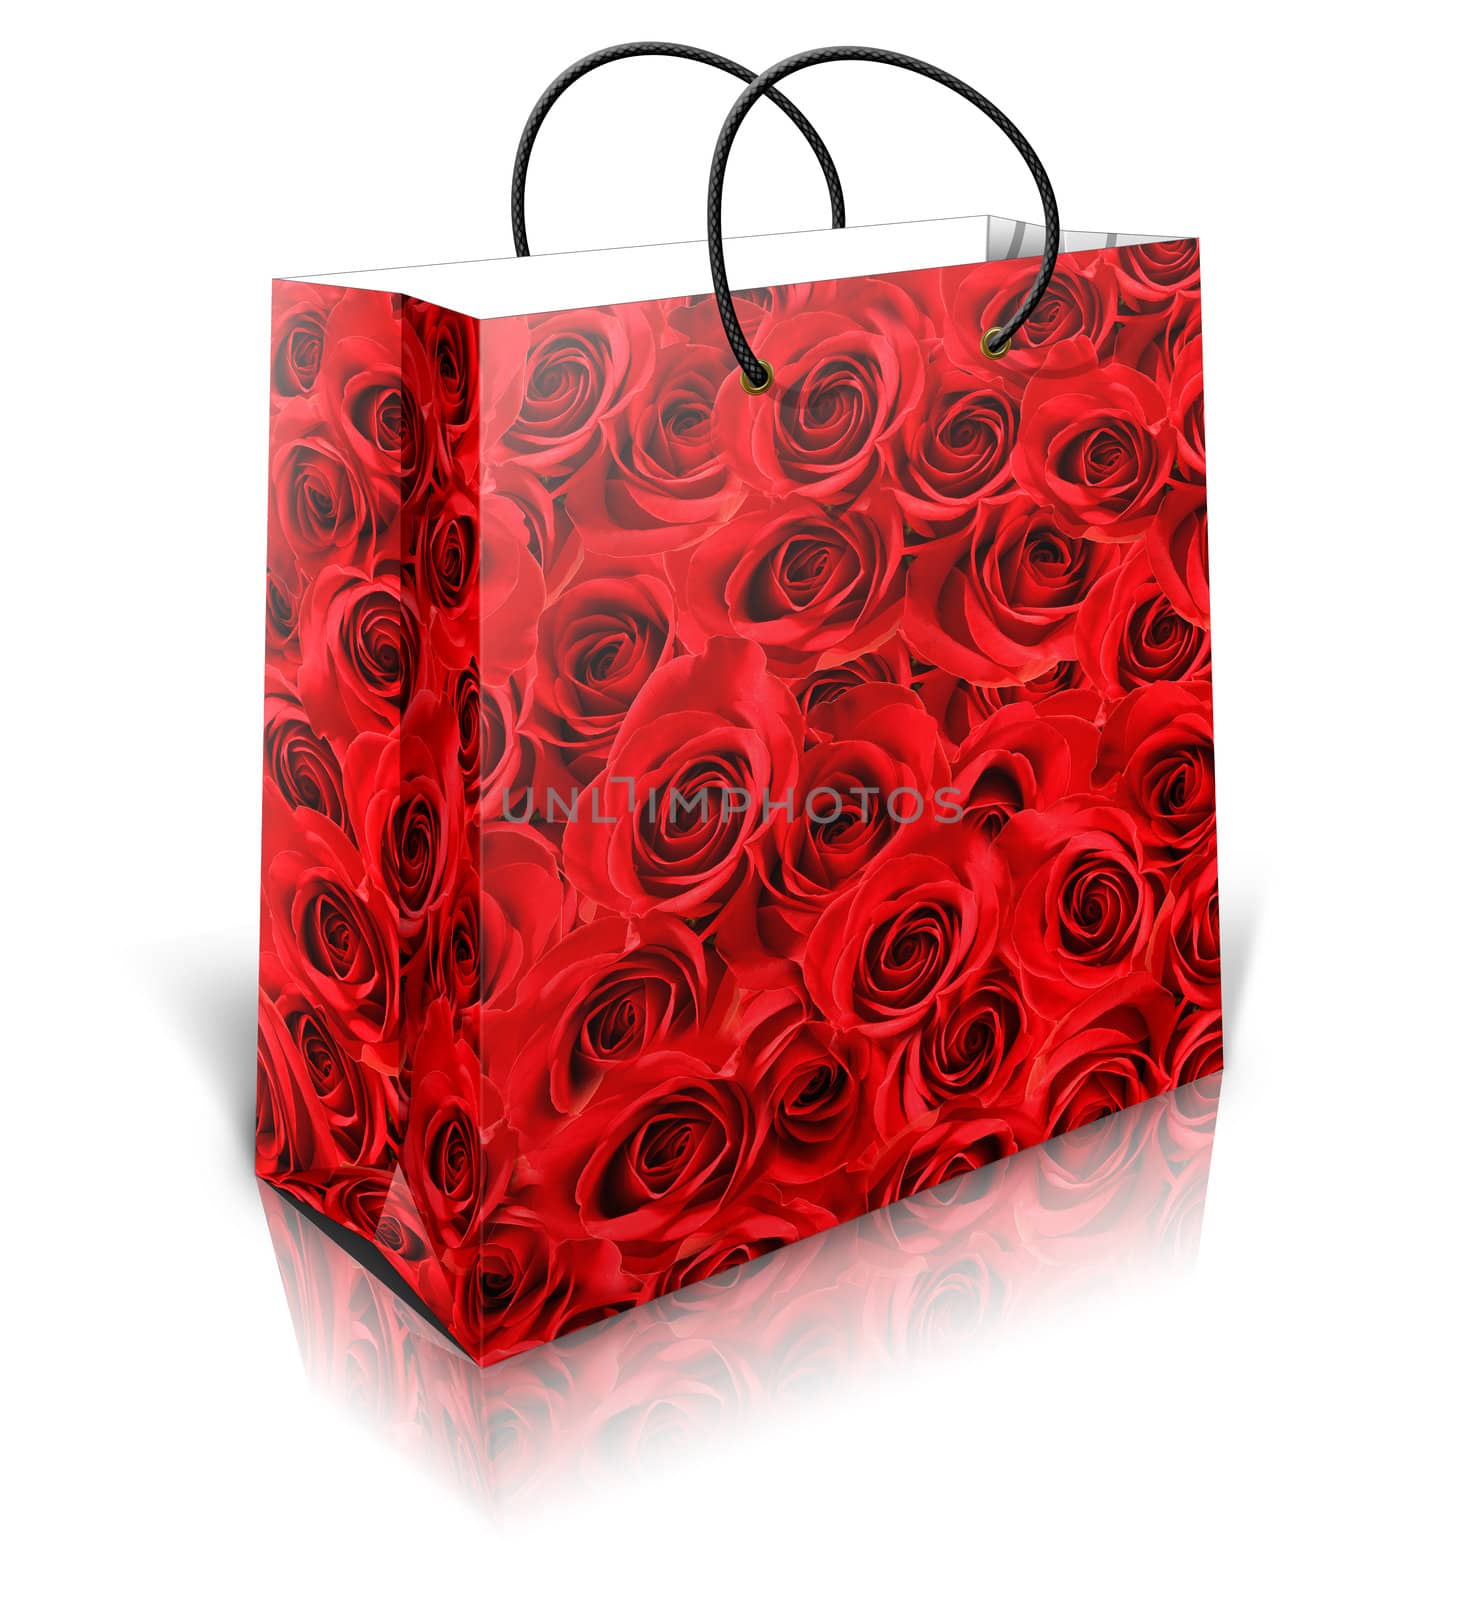 3D gift bag with red roses on white background